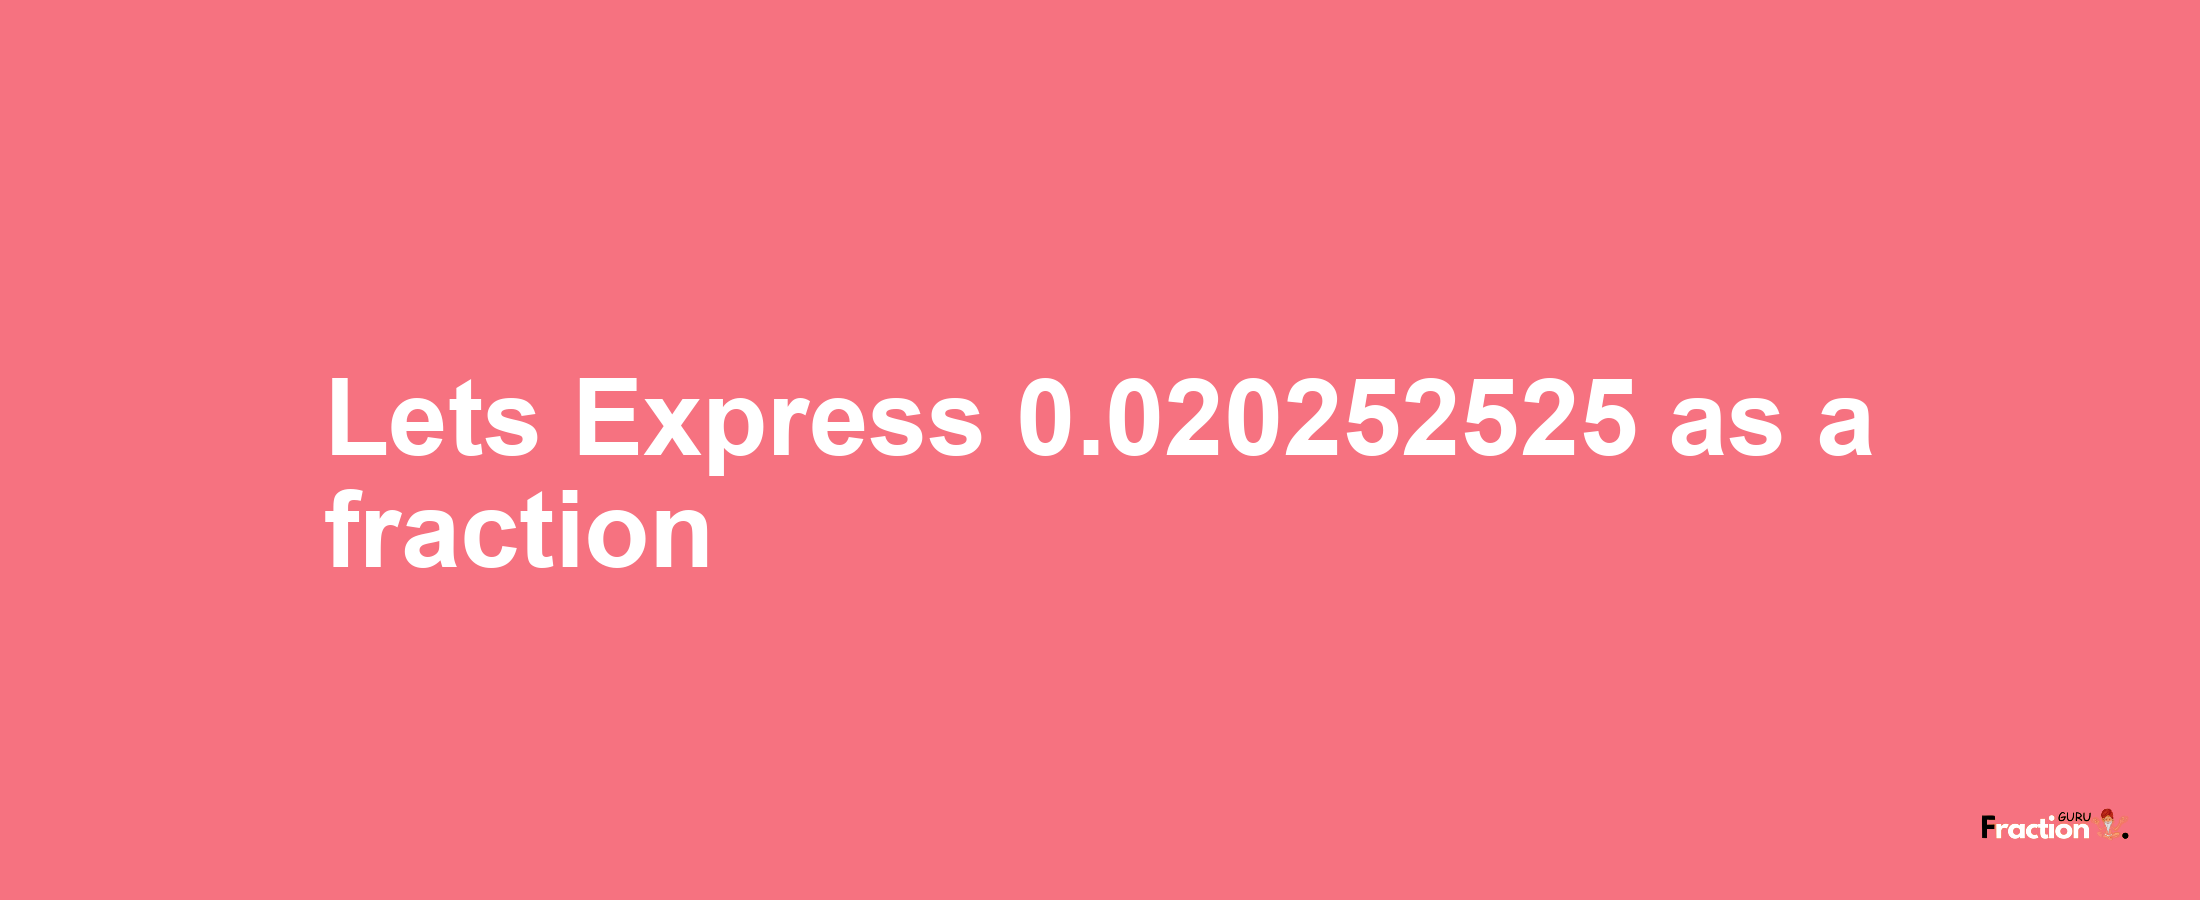 Lets Express 0.020252525 as afraction